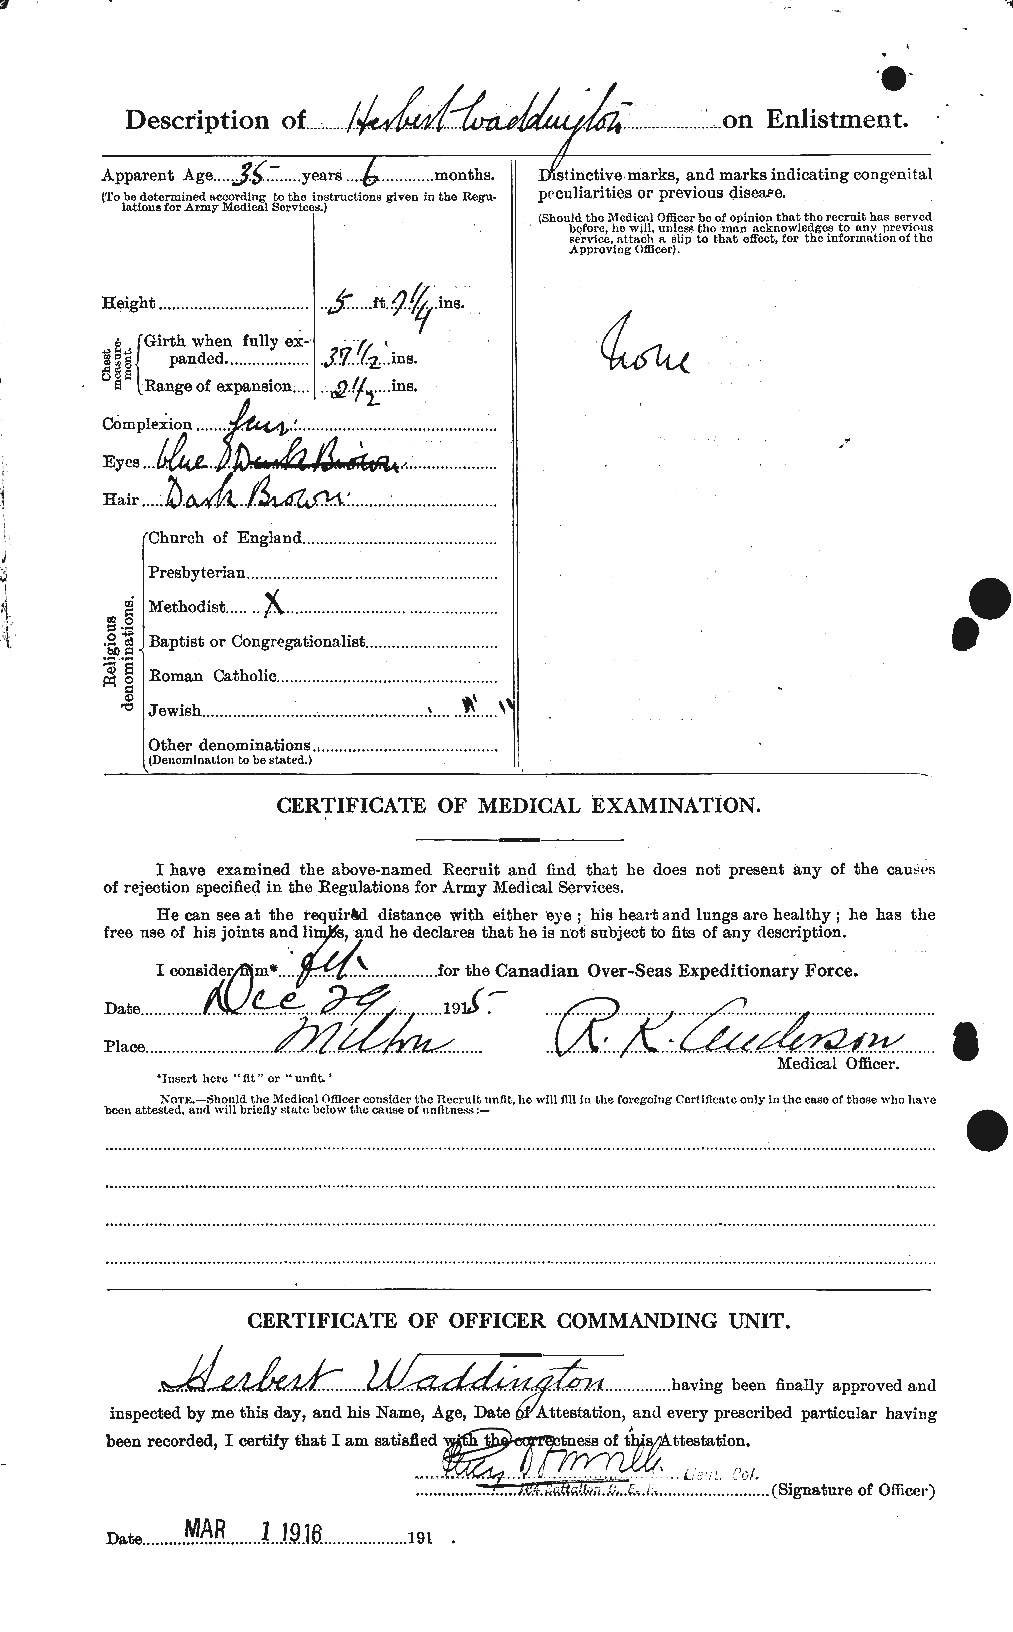 Personnel Records of the First World War - CEF 649943b